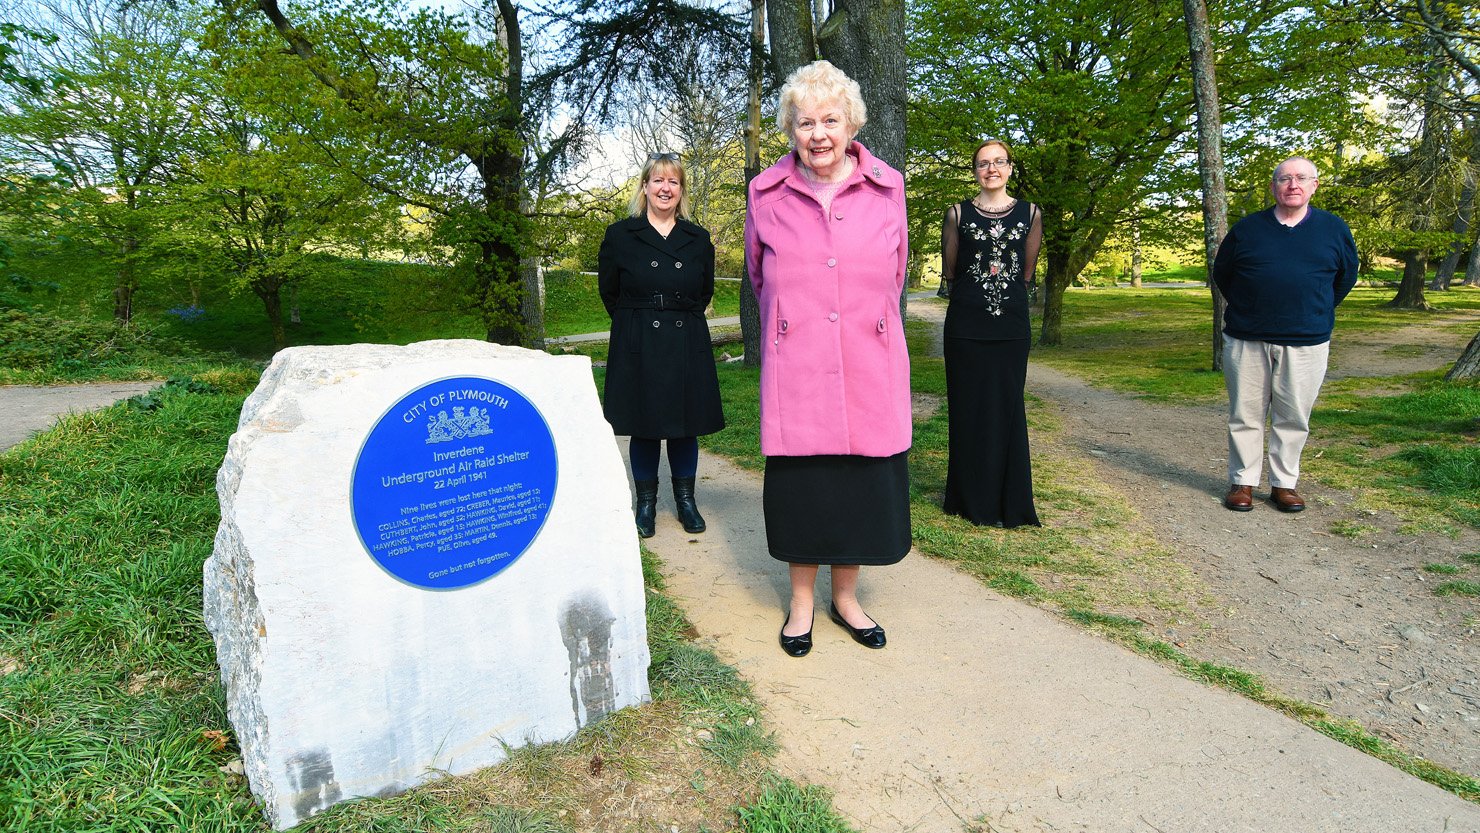 From L-R: Rachel Eyley (daughter of Shirley Stapley); Shirley Stapley; Louisa Blight, Collections Manager at The Box; Alan Barclay, Collections Assistant at The Box with the Inverdene air raid shelter plaque.